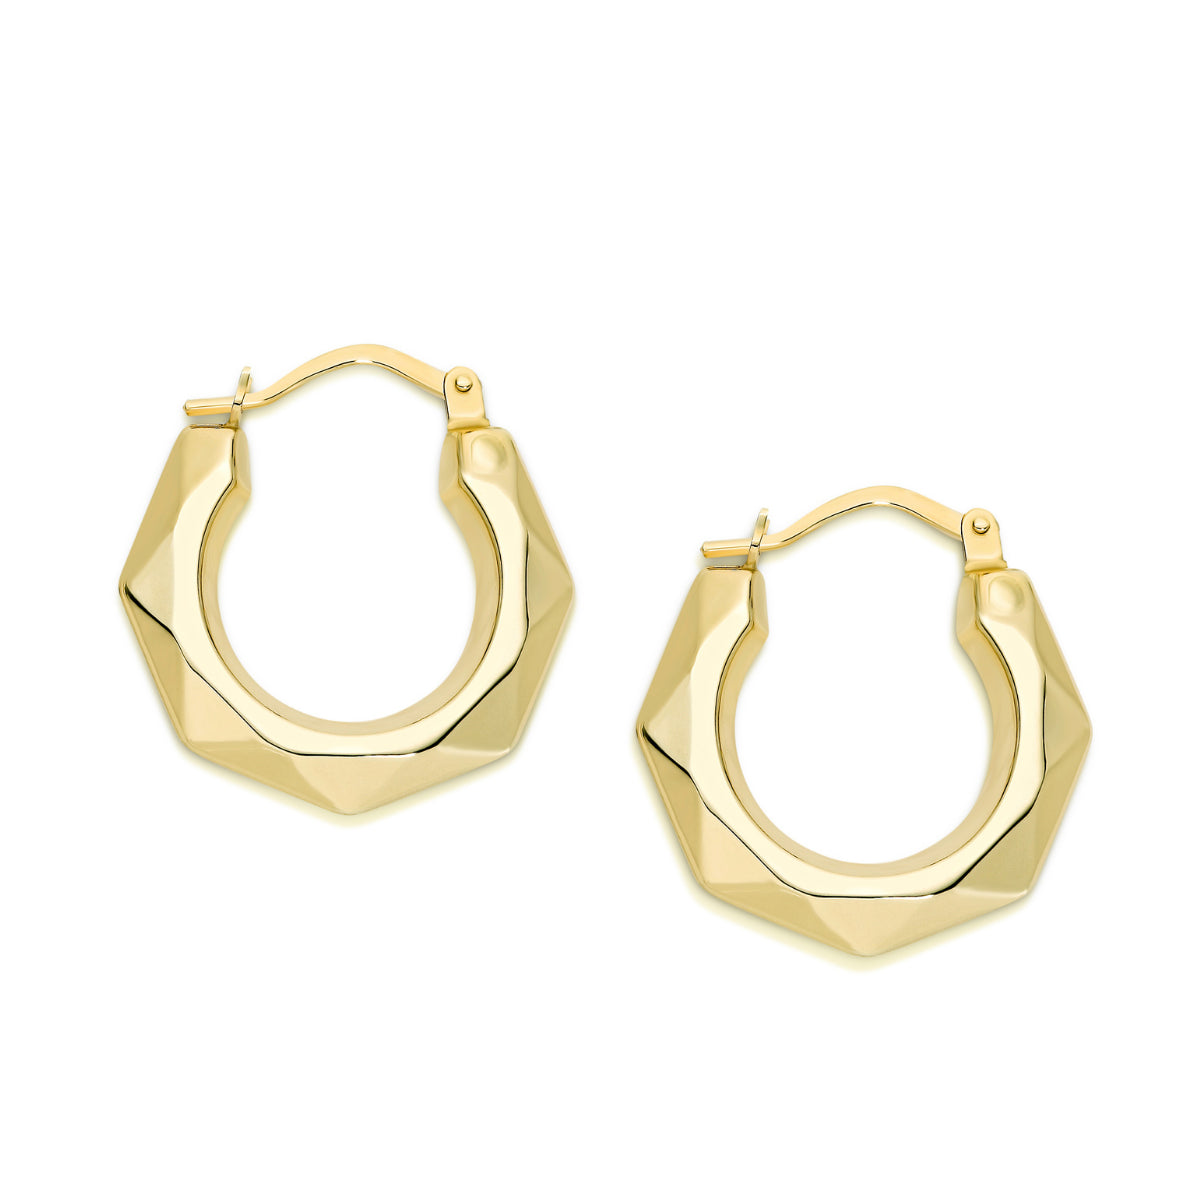 12mm Tapered Geometric 9ct Yellow Gold Hoops